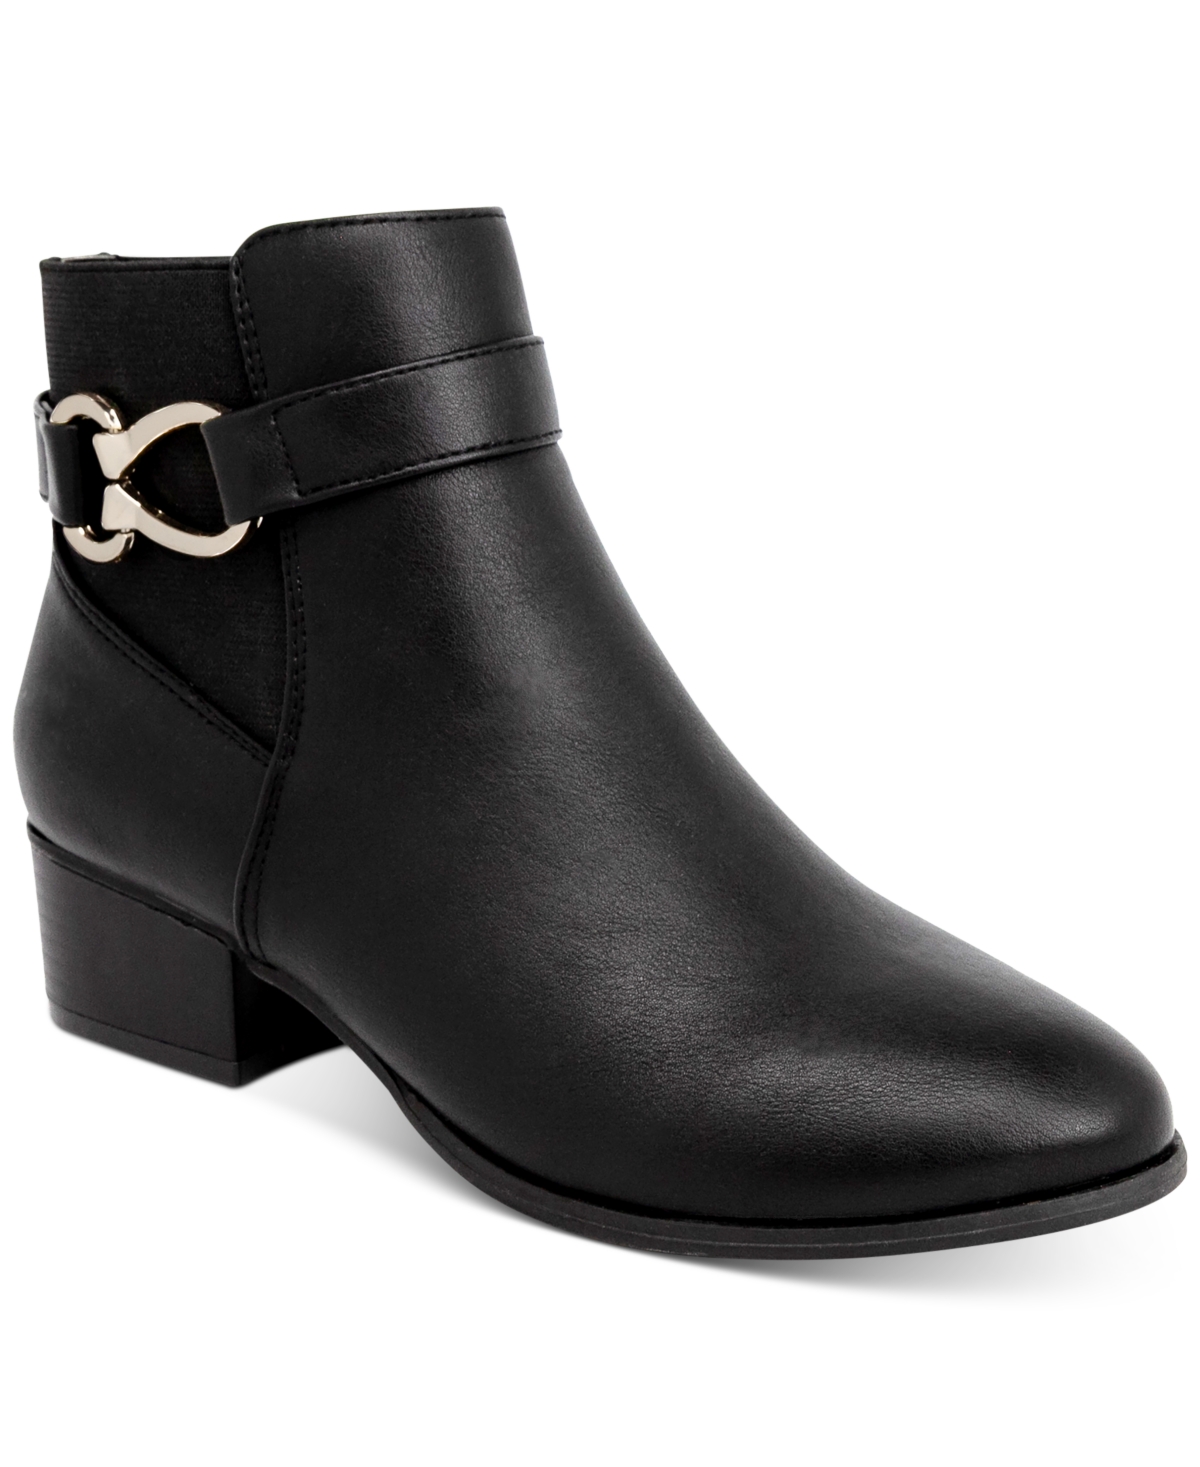 Nadine Booties, Created for Macy's - Black